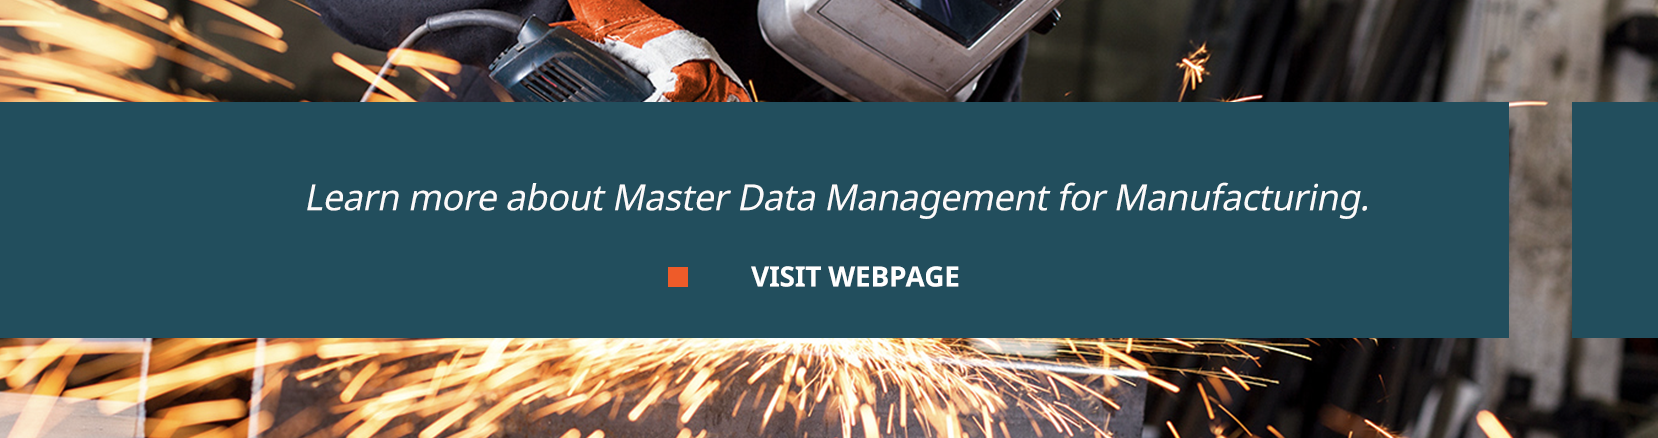 master data management for manufacturing